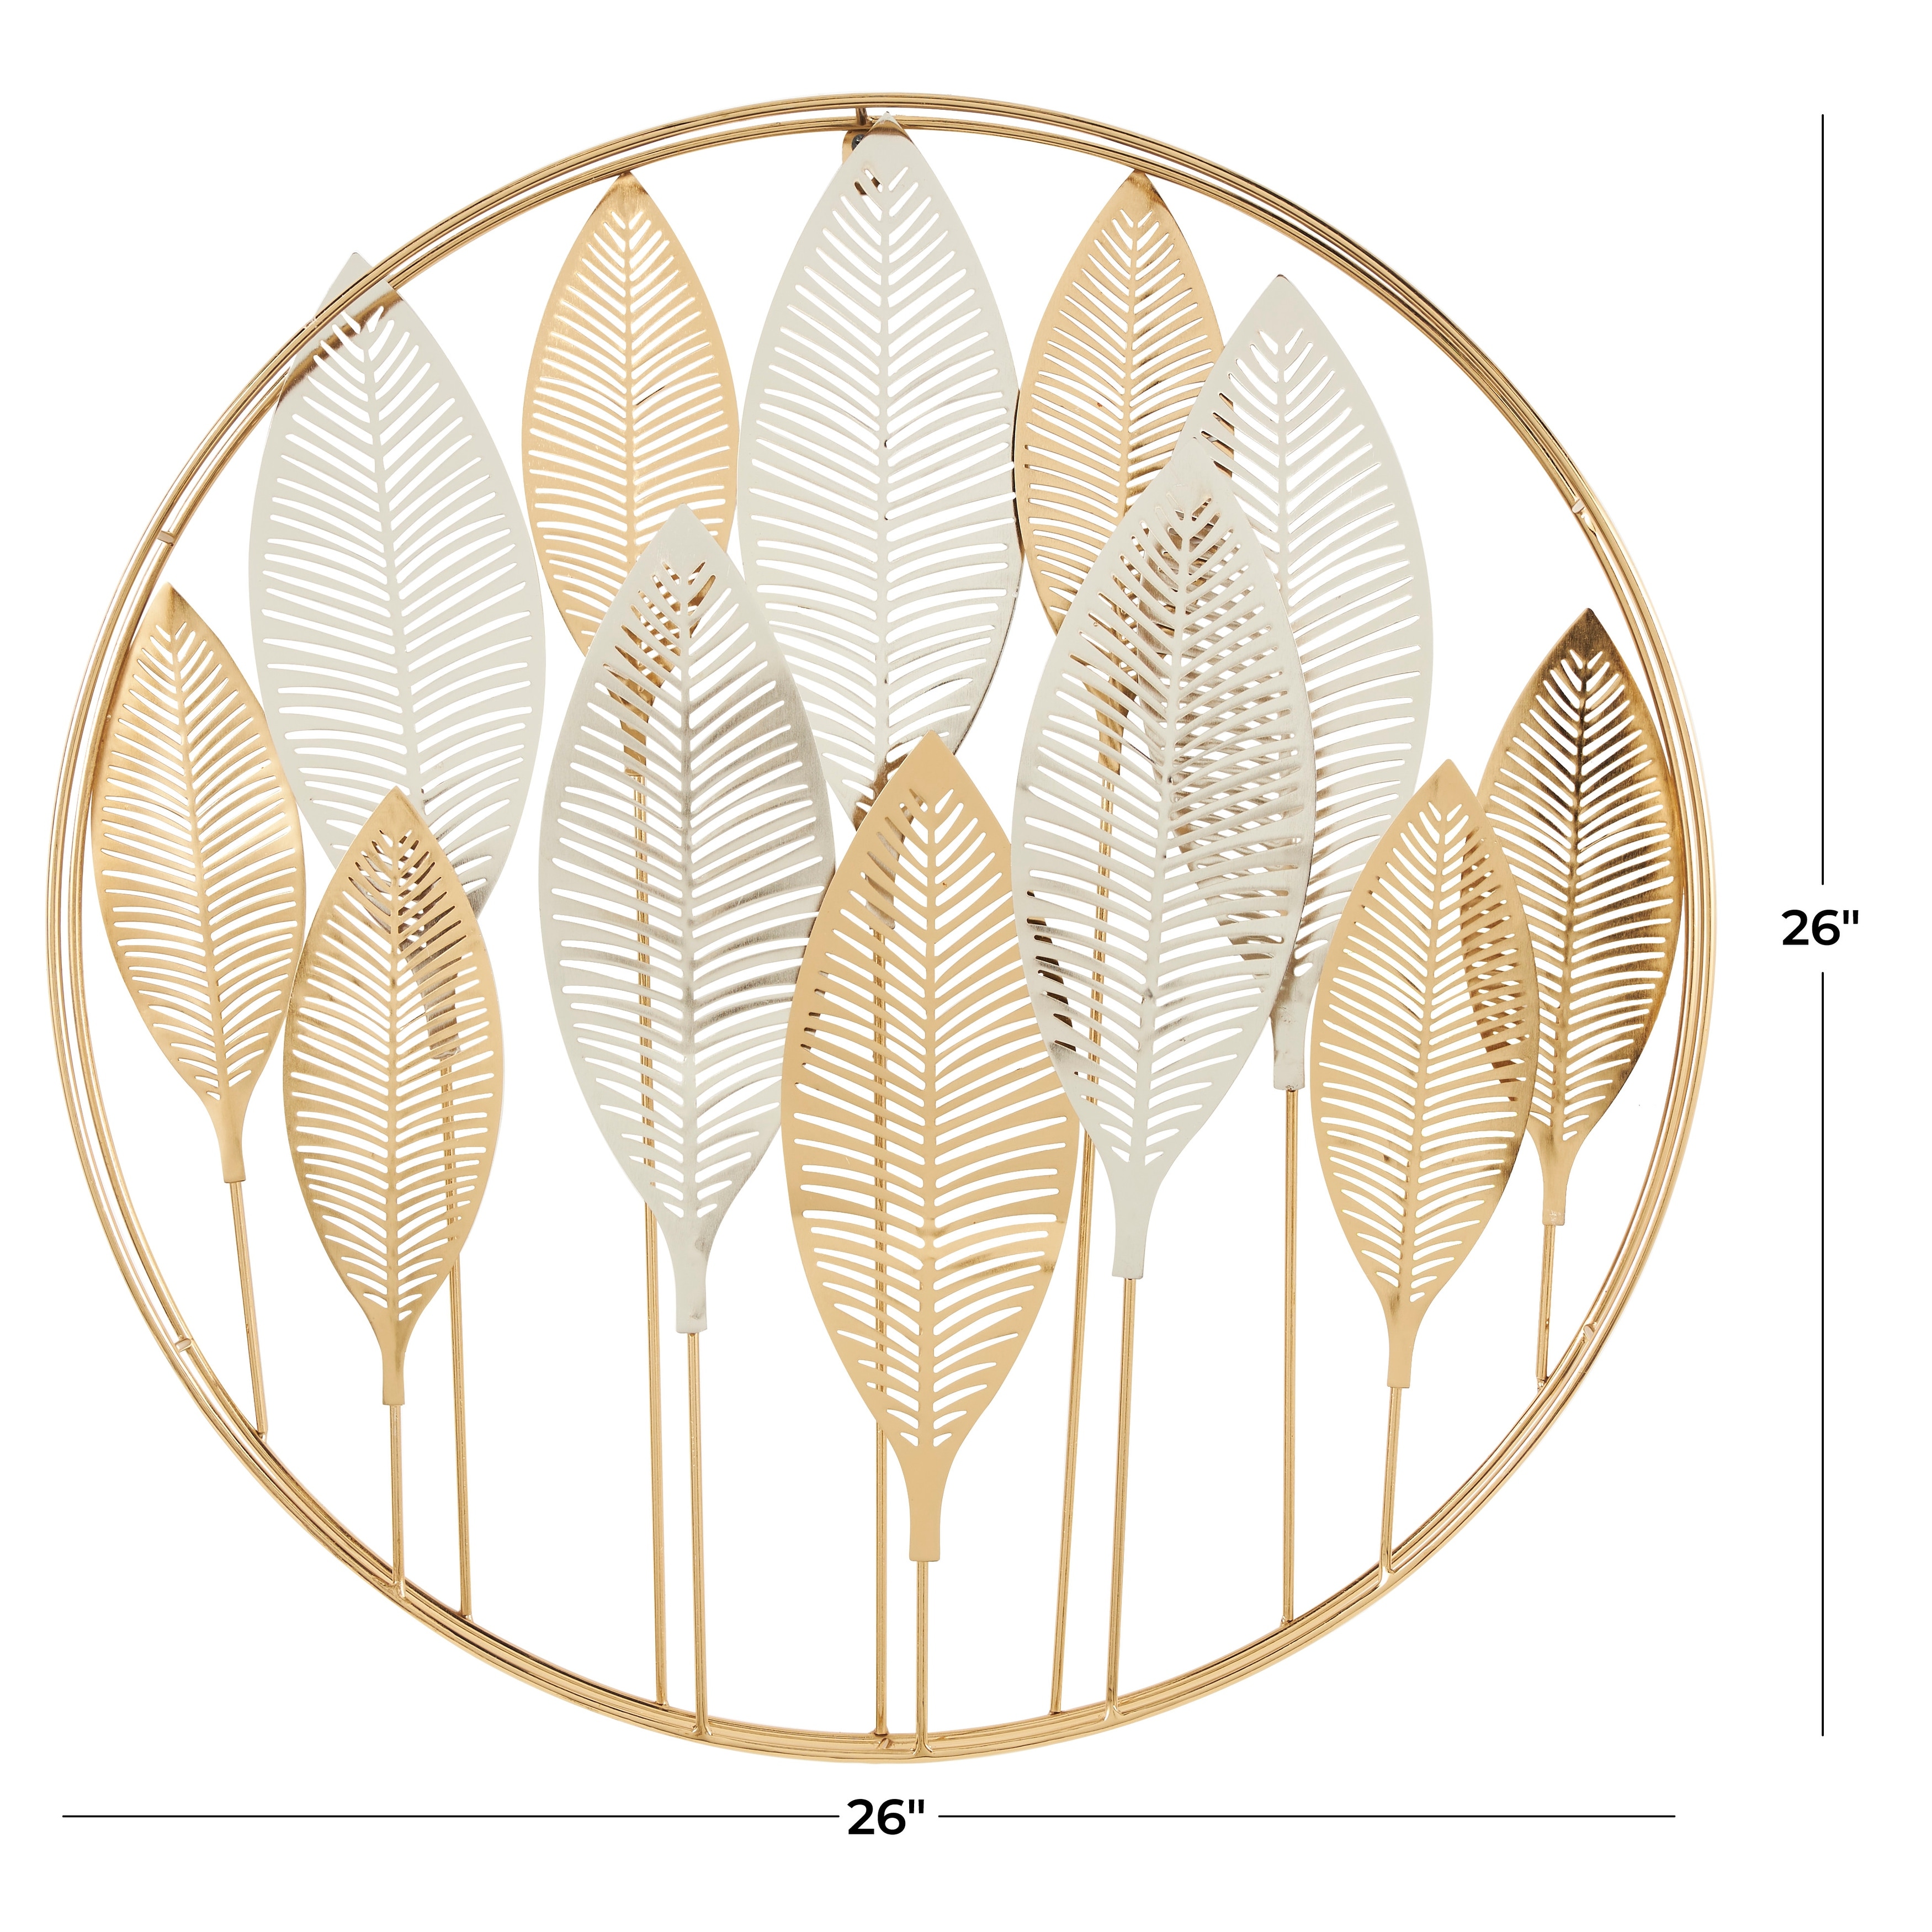 Gold Metal Metallic Leaf Wall Decor with Circular Frame and Silver Accents